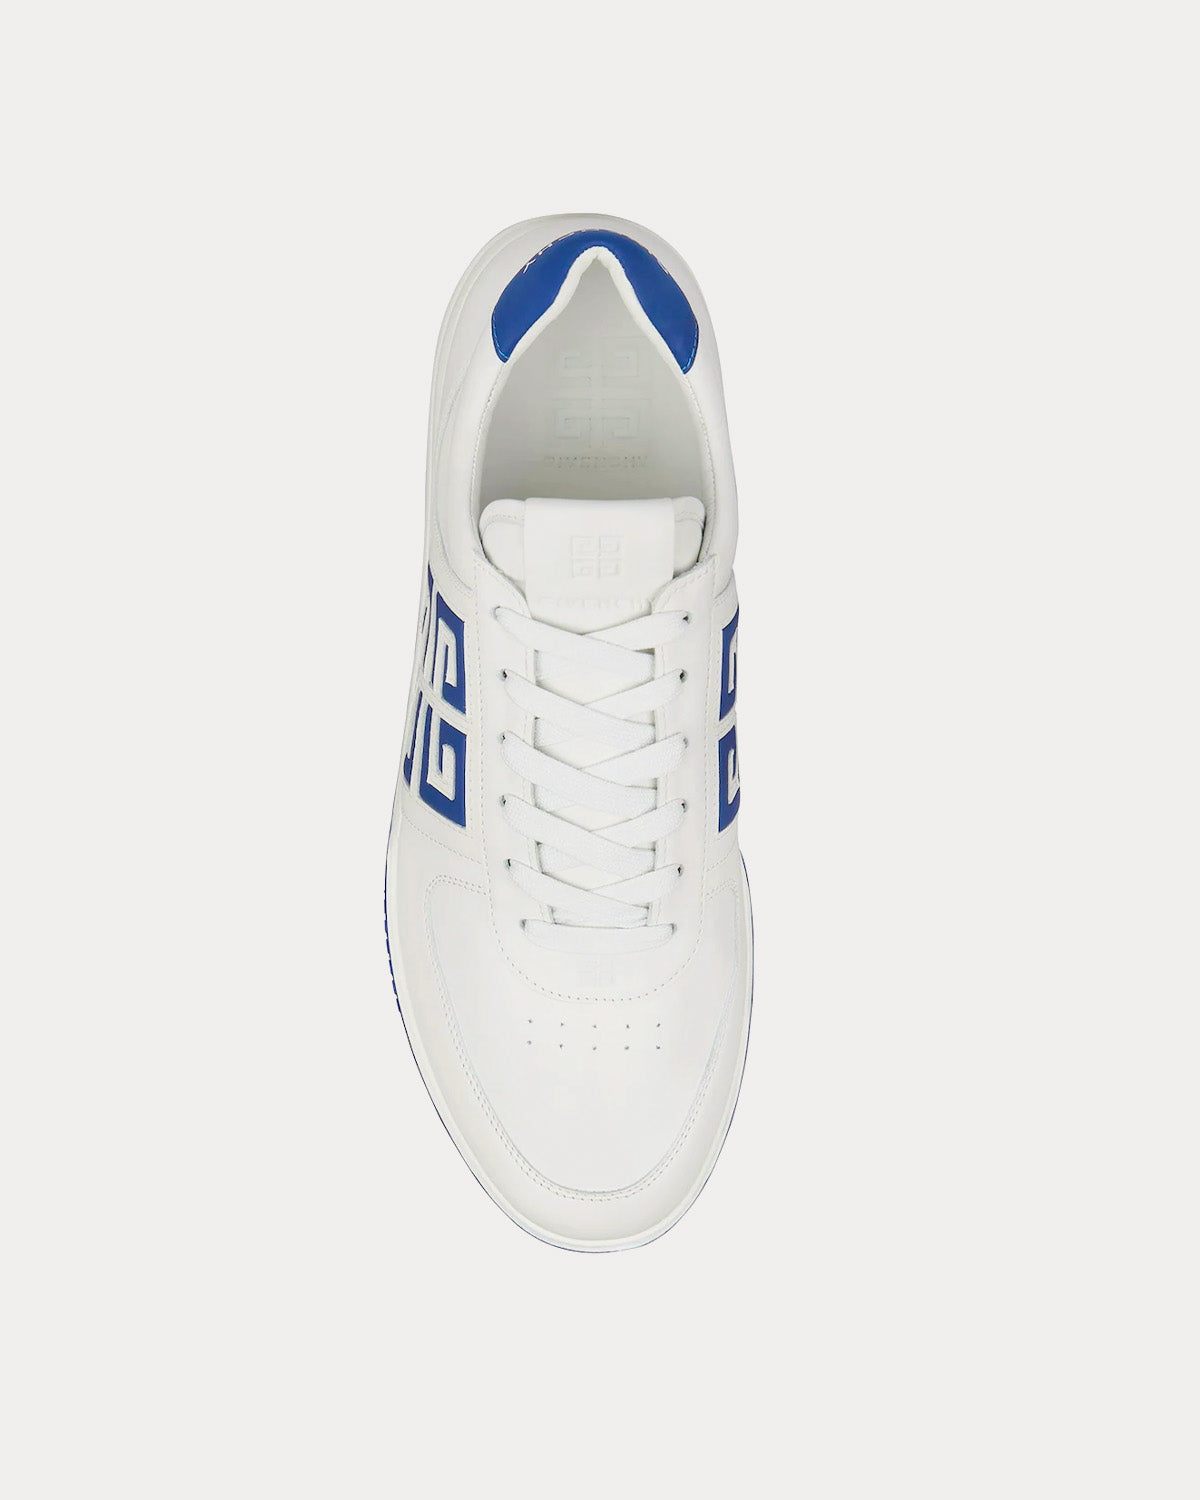 Givenchy - G4 Leather White / Blue Low Top Sneakers